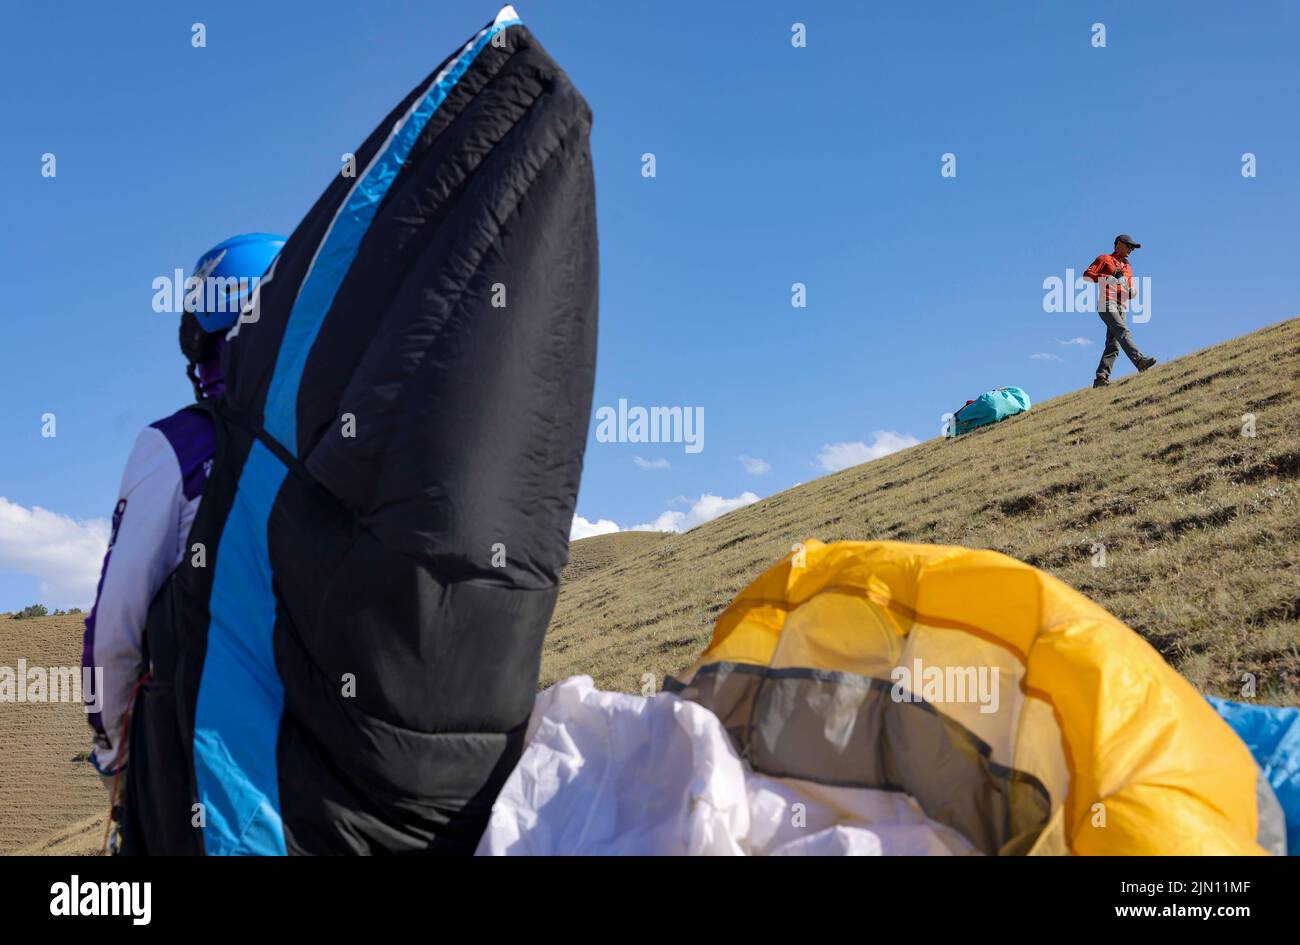 (220808) -- XINJIANG, Aug. 8, 2022 (Xinhua) -- Chen Ruifeng prepares before taking off in southern suburb of Urumqi, northwest China's Xinjiang Uygur Autonomous Region, June 11, 2022. Born in Xinjiang, 52-year-old Chen Ruifeng is a paragliding amateur. He says he feels like having his own wings when the paraglider opens. In 2016, Chen Ruifeng started to practice paragliding. Later on, he joined a local club and received his flying certificate after training. As an outdoor enthusiast, he also engages himself in trail running, mountaineering and ice climbing. In his opinions, the unique terrain Stock Photo